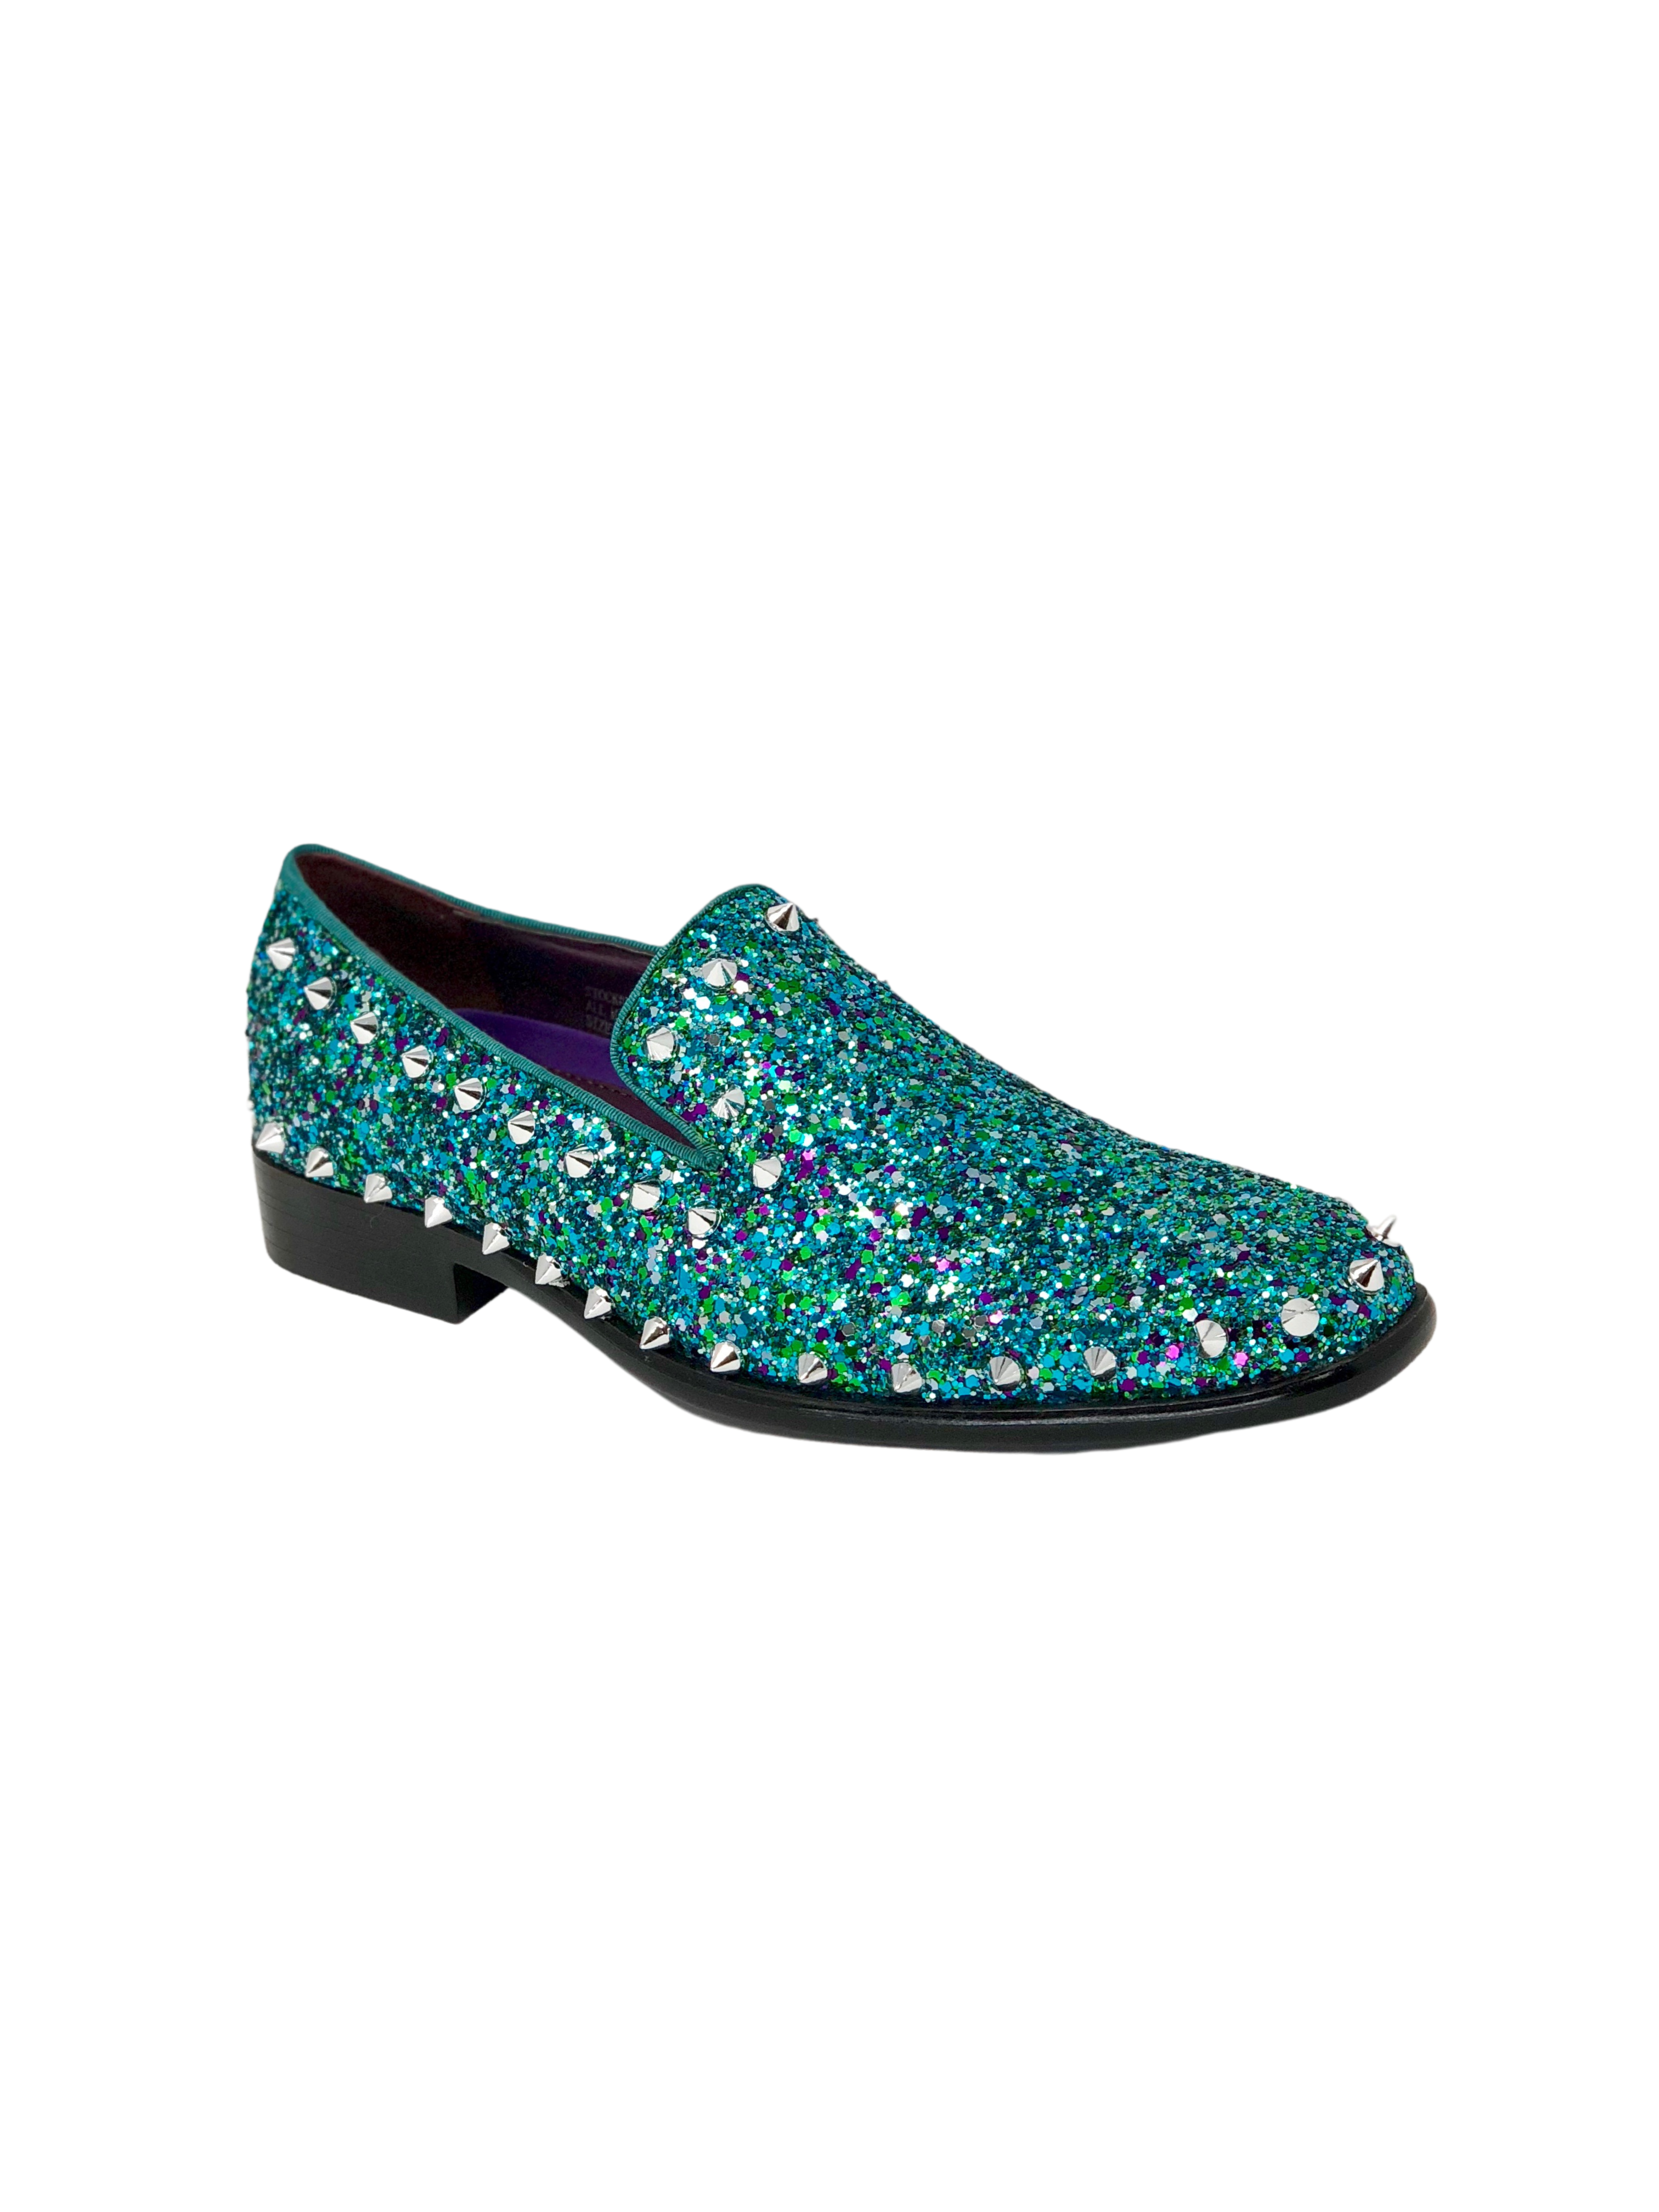 After Midnight Turquoise multi-colored shoe with silver spikes